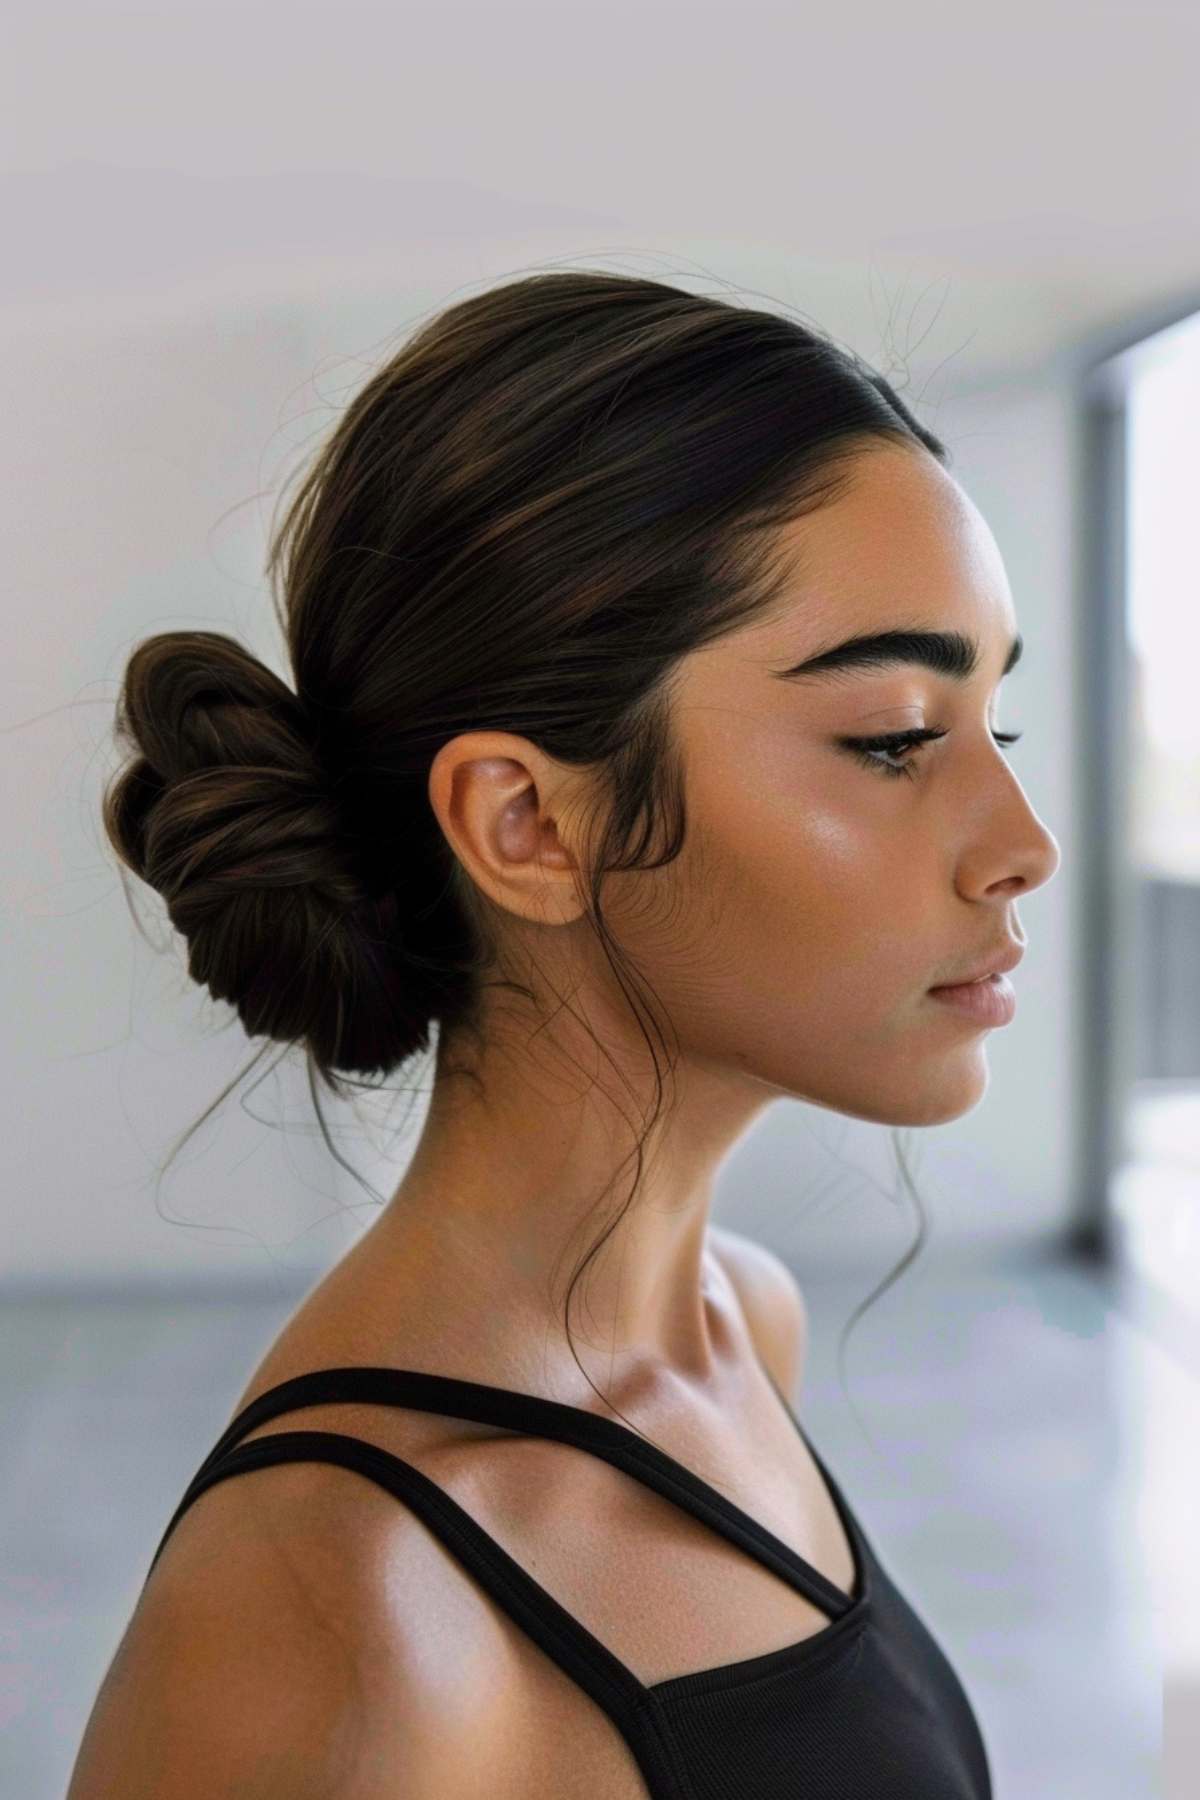 Woman with a sleek, gym-ready low bun at the nape, designed for an active lifestyle while maintaining a polished look suitable for various settings.